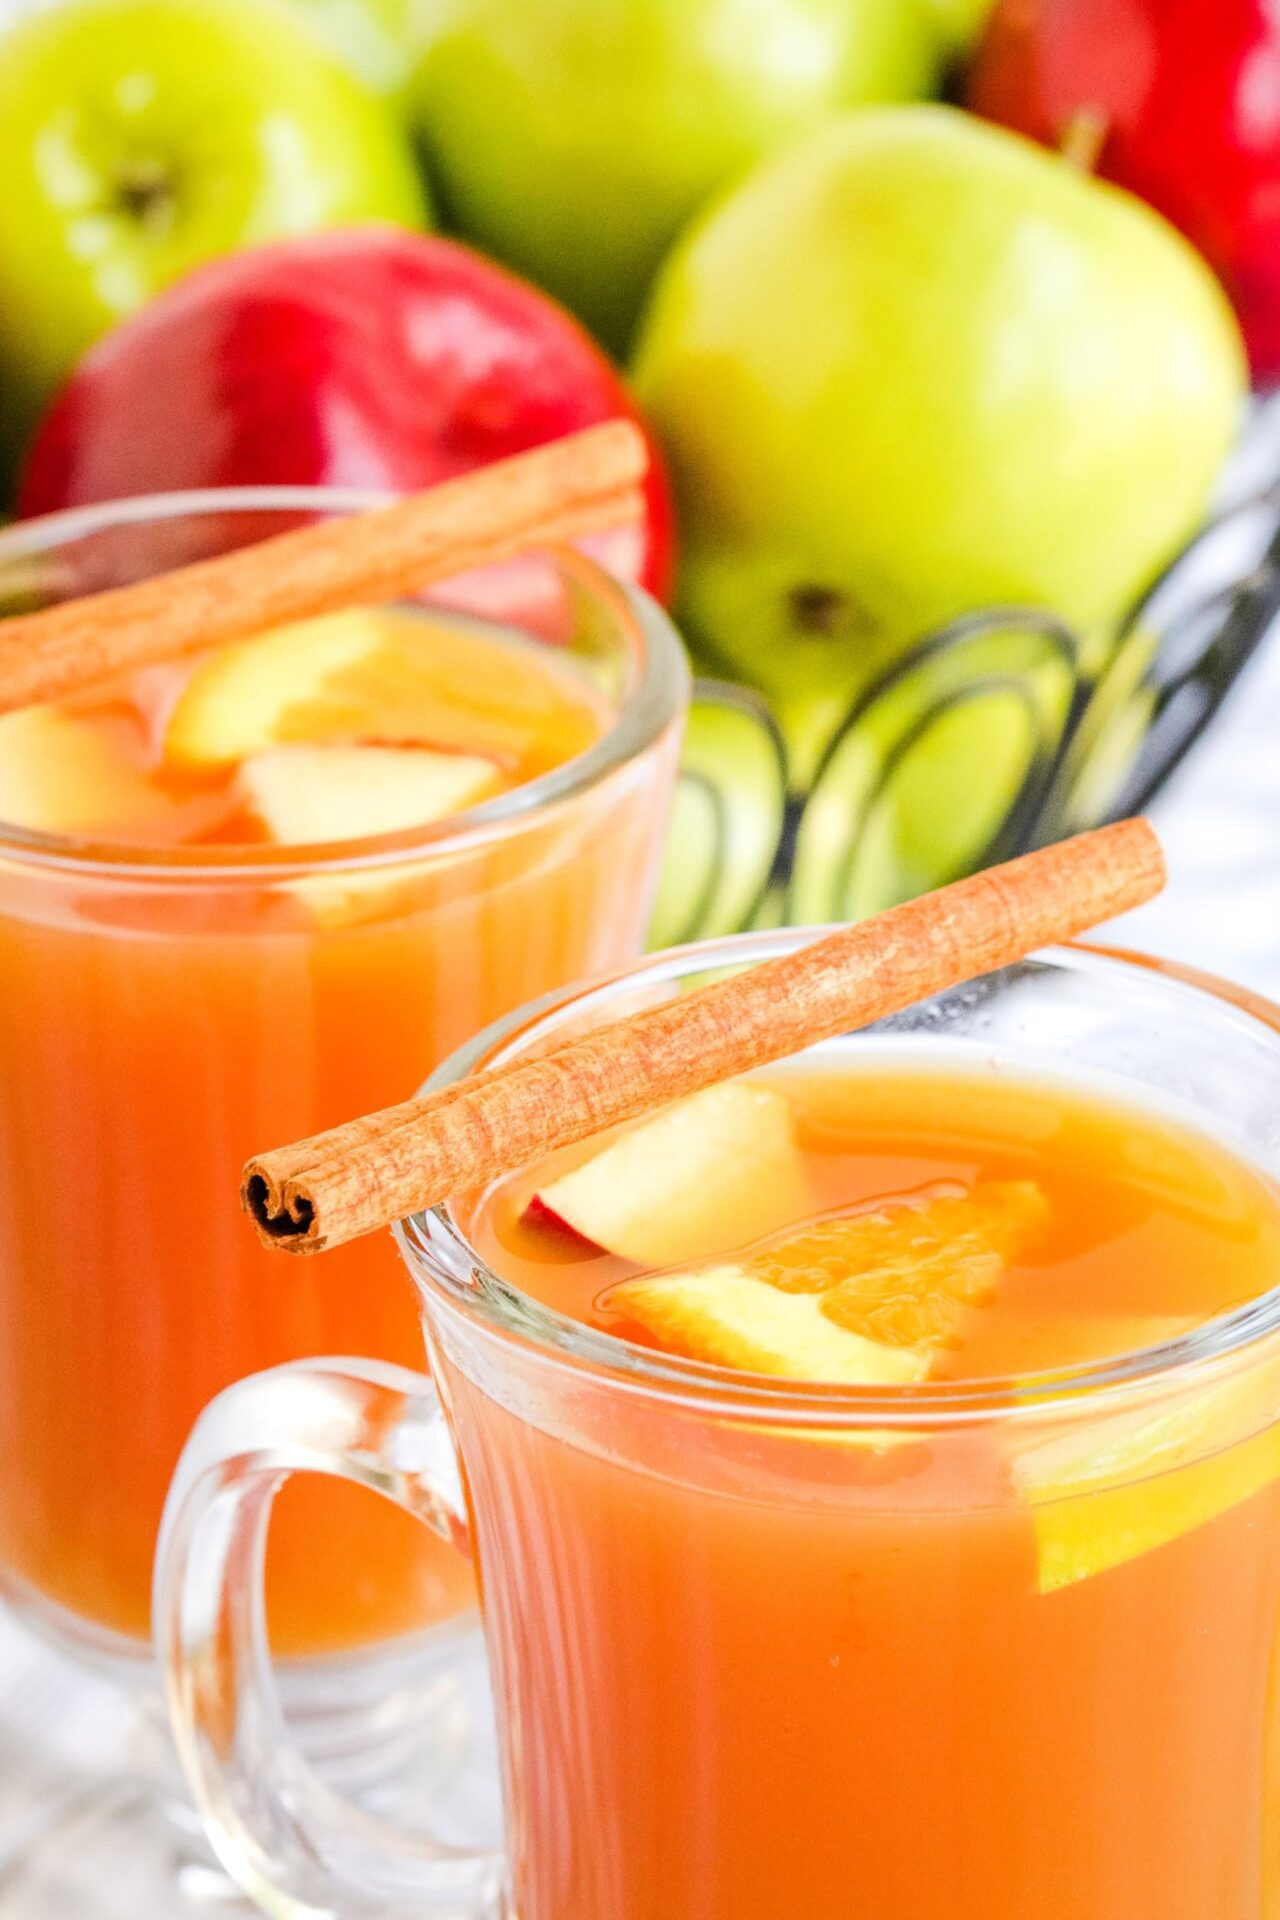 Are you looking for a super simple traditional Wassail or recipe or mulled cider? Well, look no further this recipe is delicious and simple that the whole family will enjoy!